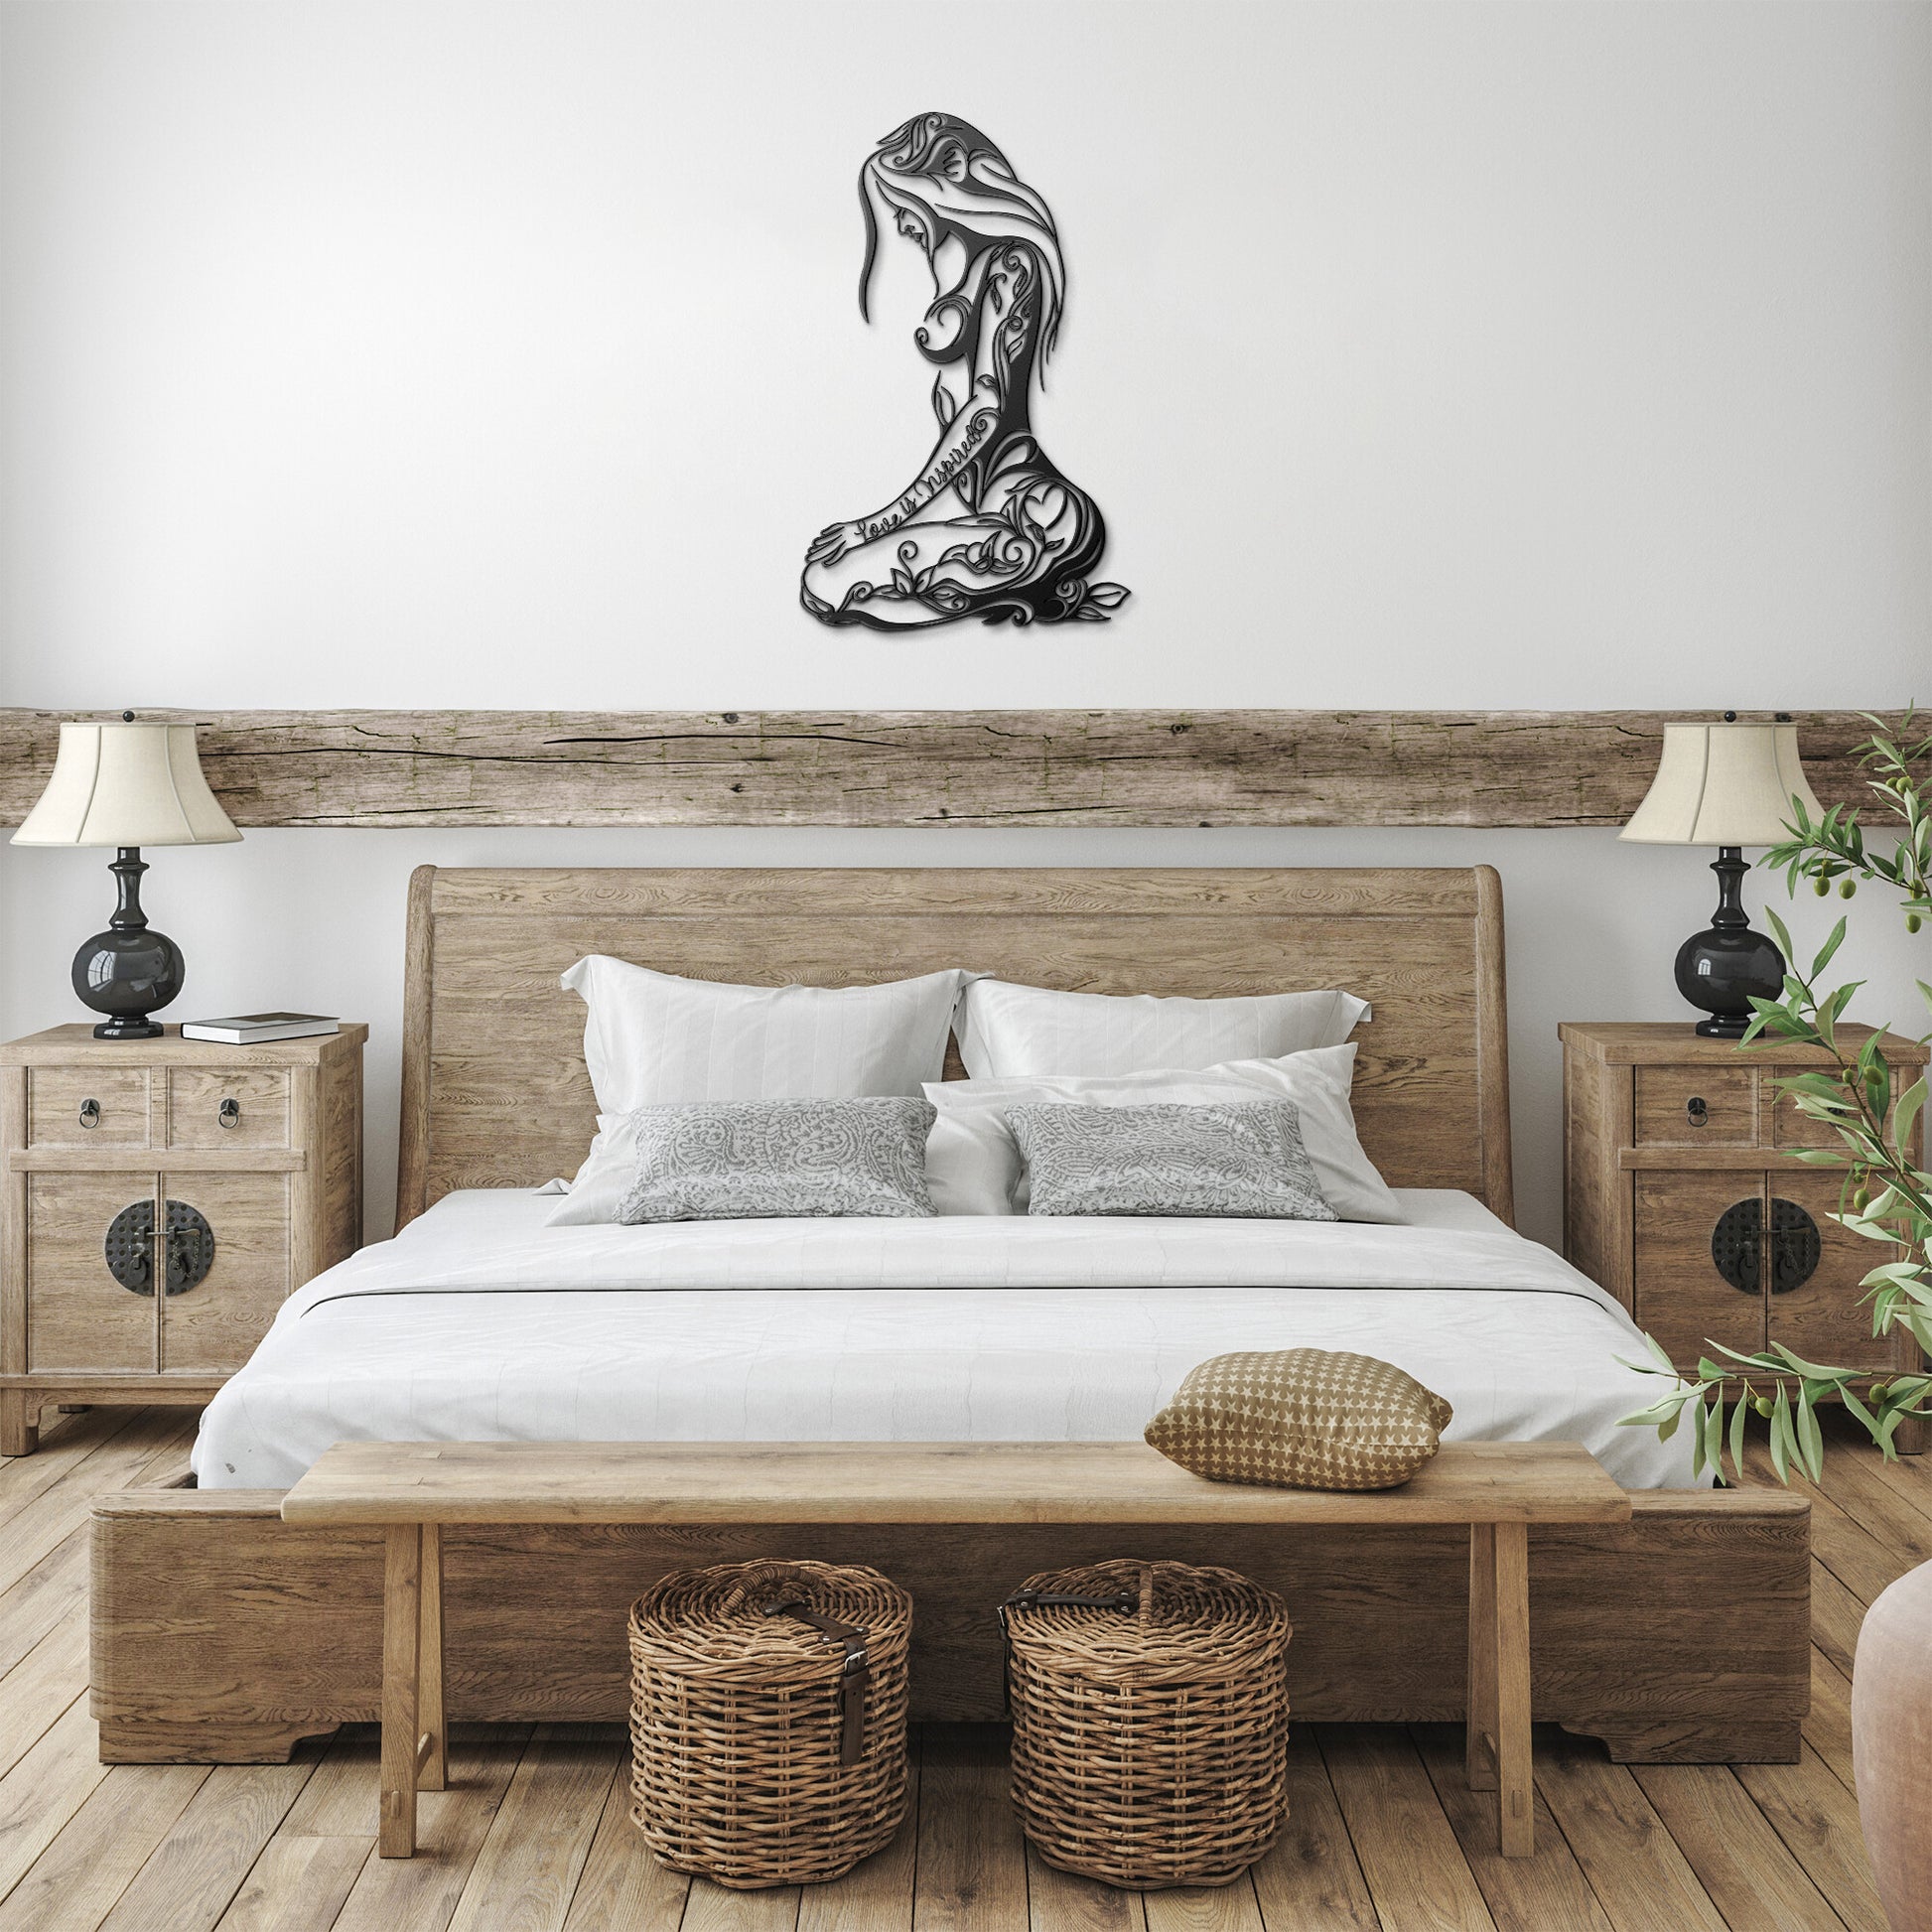 Erotic Female Metal Wall Art, Line Art Nude Woman, Love Is Inspirational Bedroom Art for Over Bed, Unique Gift For Her Space, Silhouette Art